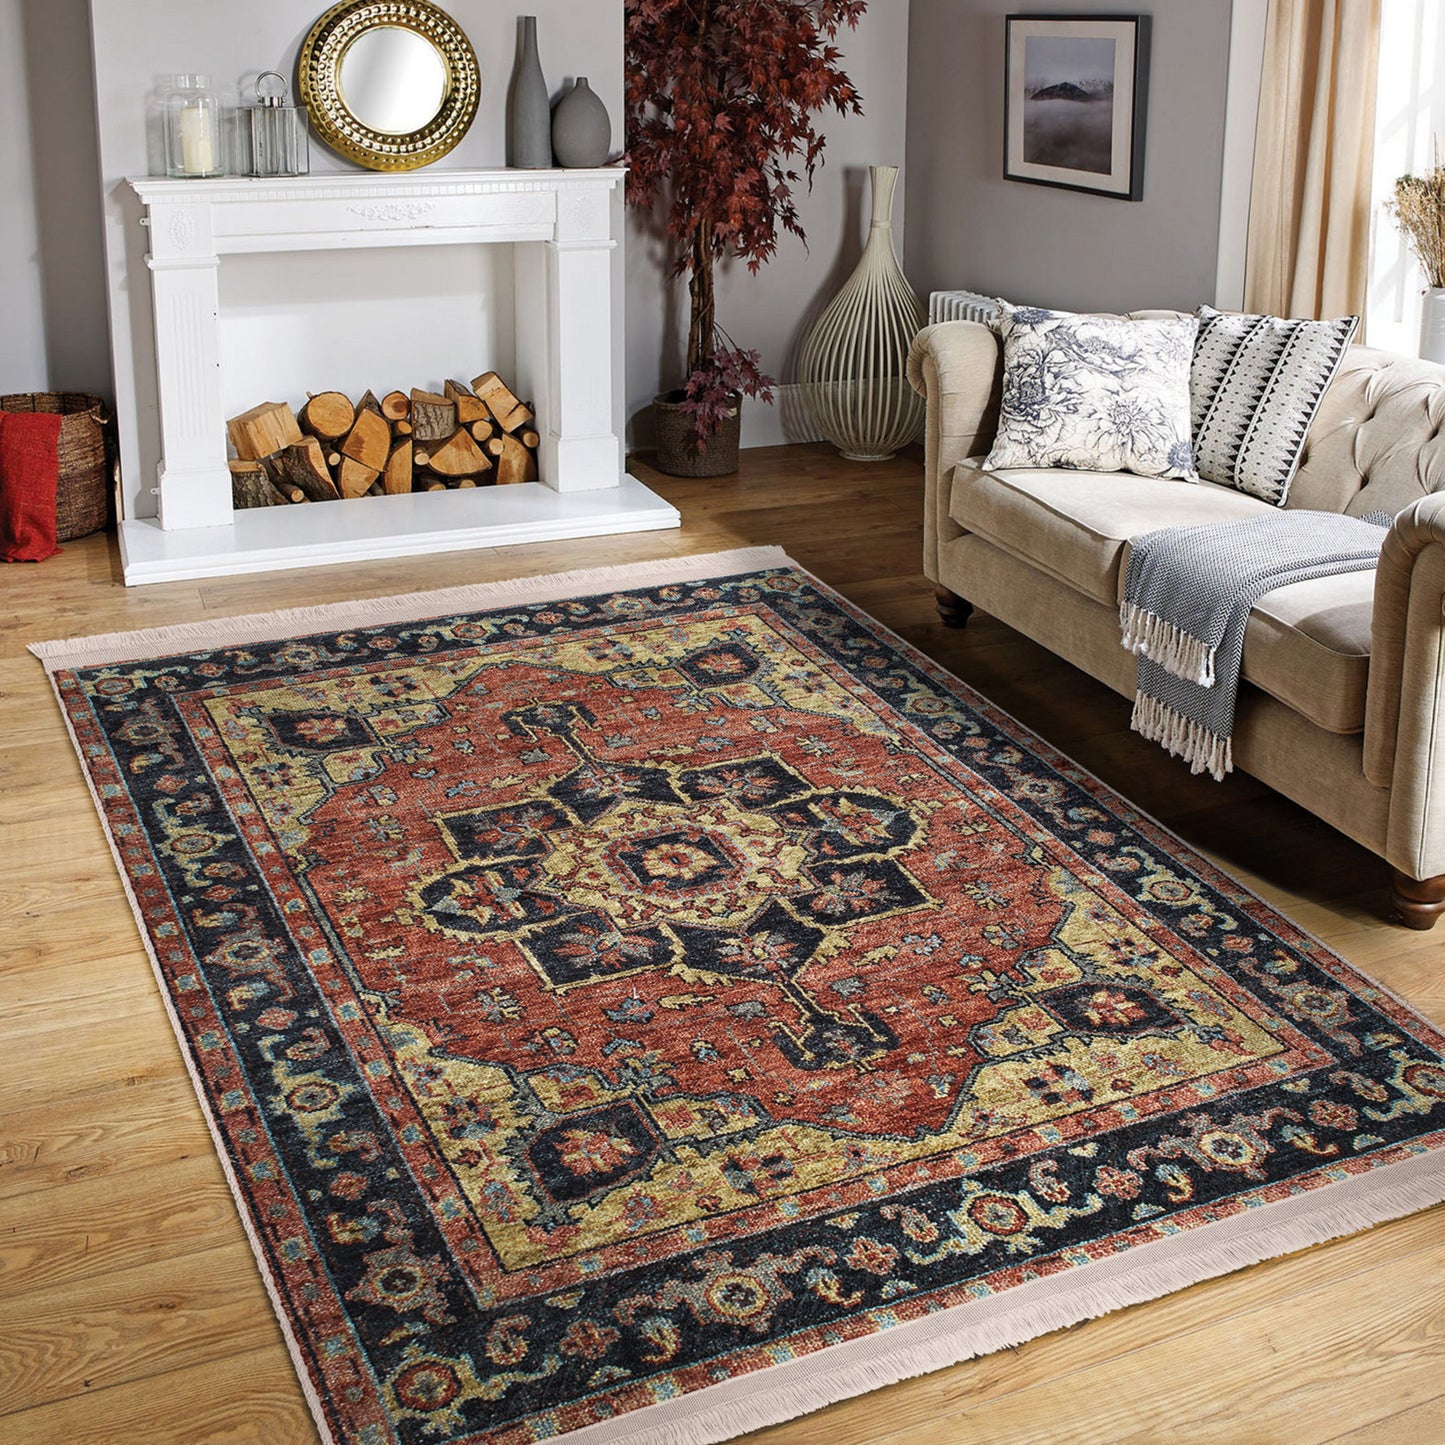 Versatile Traditional Area Rug - Office or Study